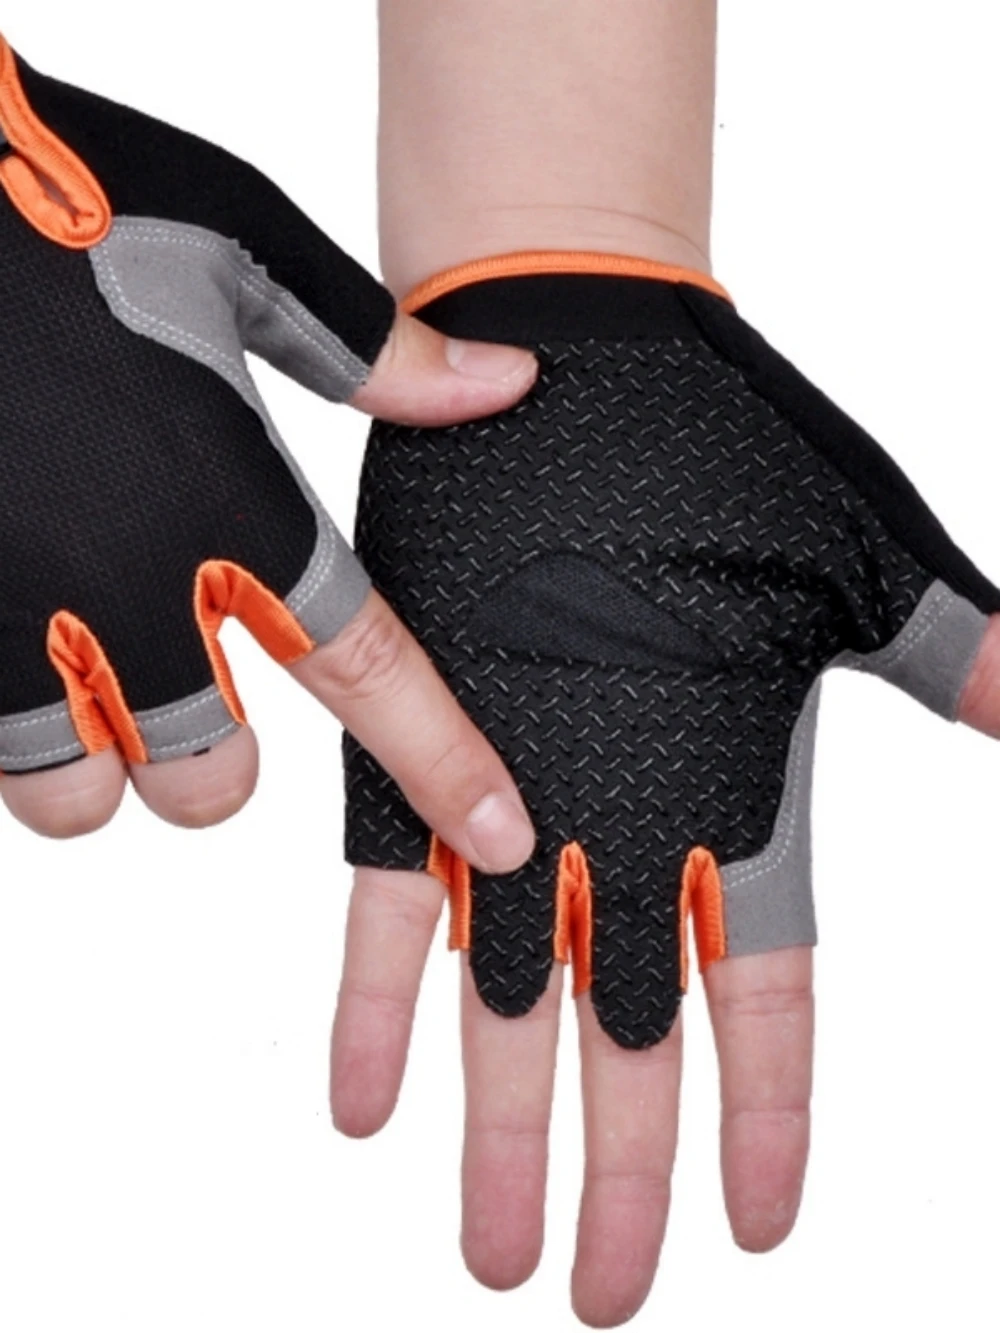 Half Finger Anti Slip Cycling Fitness Gloves Men Women Anti-Sweat Breathable Shock Riding Glove Exercise Sports Gloves men s cycling gloves half finger breathable anti skid gloves for sports riding bicycle guantes shockproof pads cucling gloves